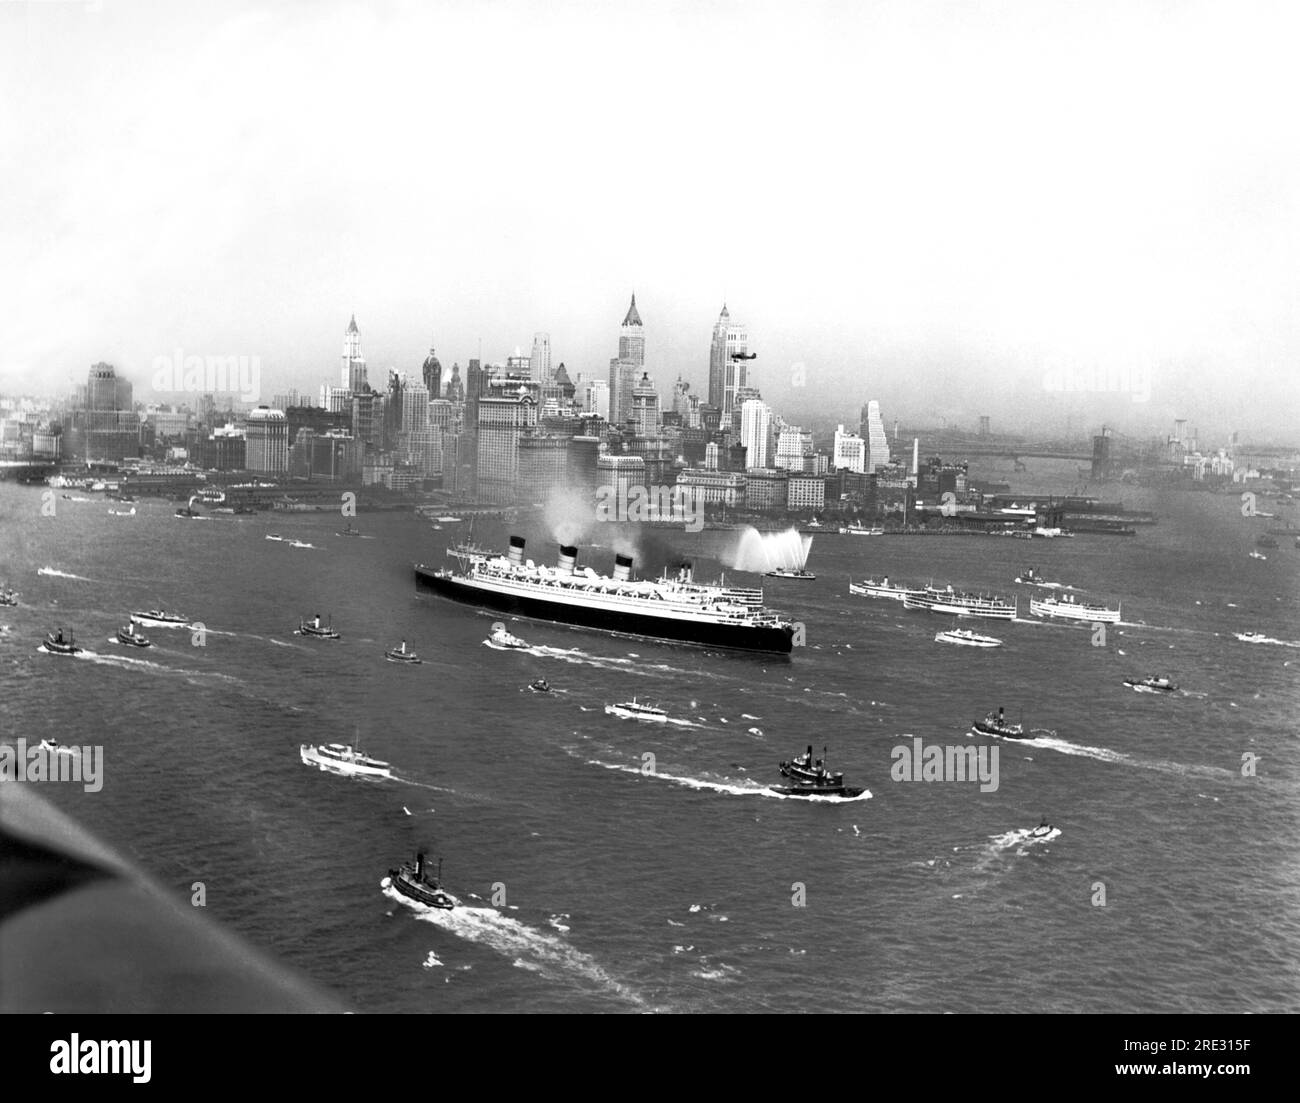 New York, New York:  June 1, 1936 The S.S. Queen Mary steams up NY harbor with a flotilla of escorts after making her maiden voyage across the Atlantic Ocean. Stock Photo